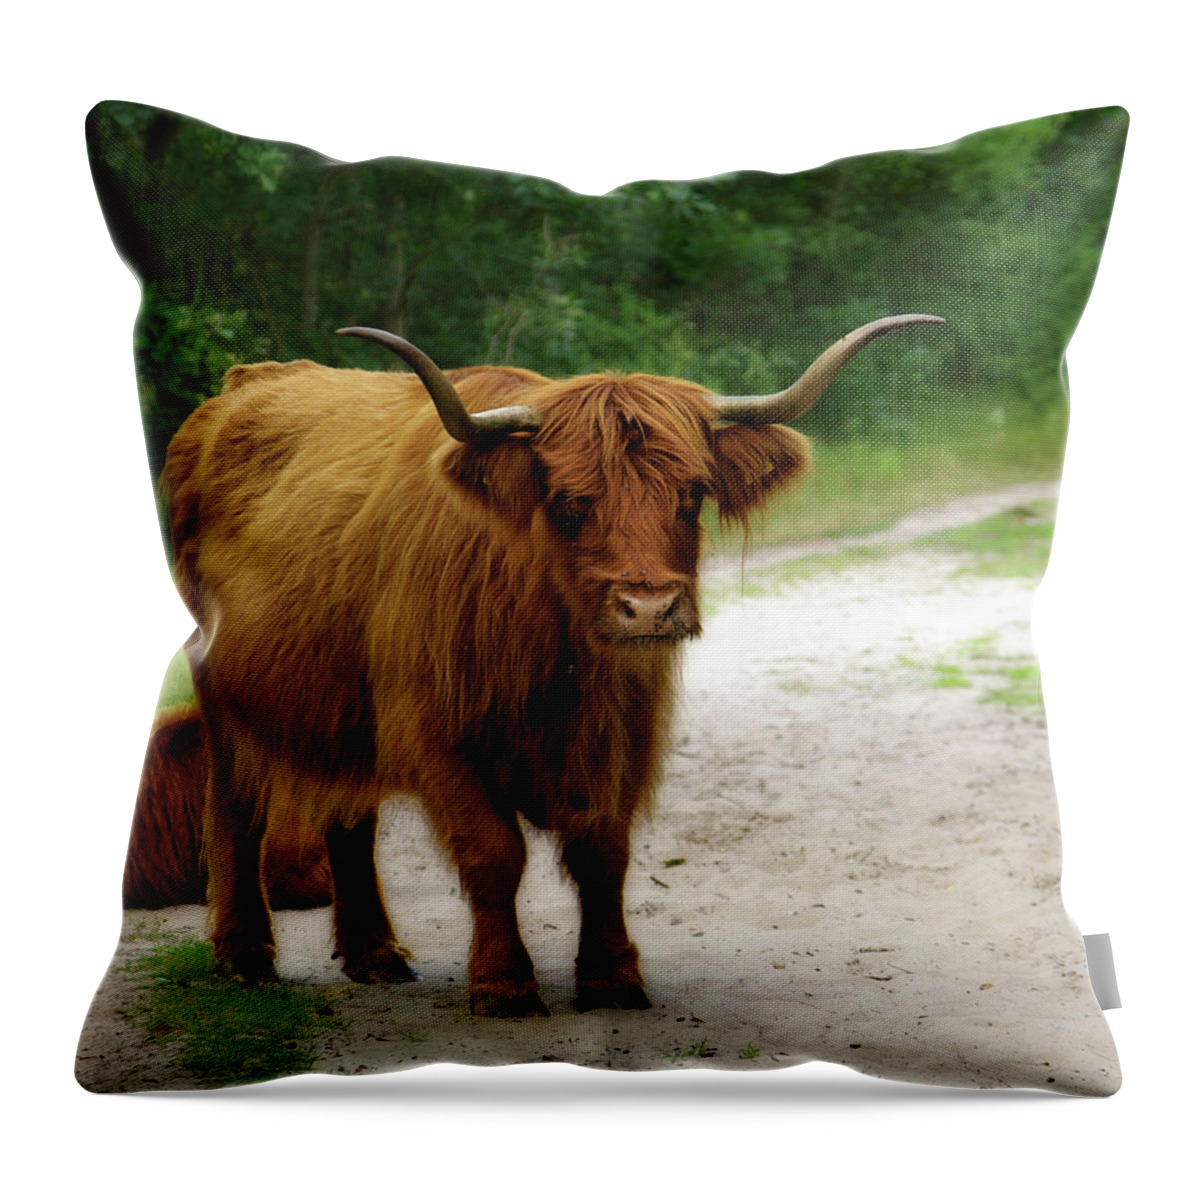 Horned Throw Pillow featuring the photograph Scottish Highlanders by Jan Vogel